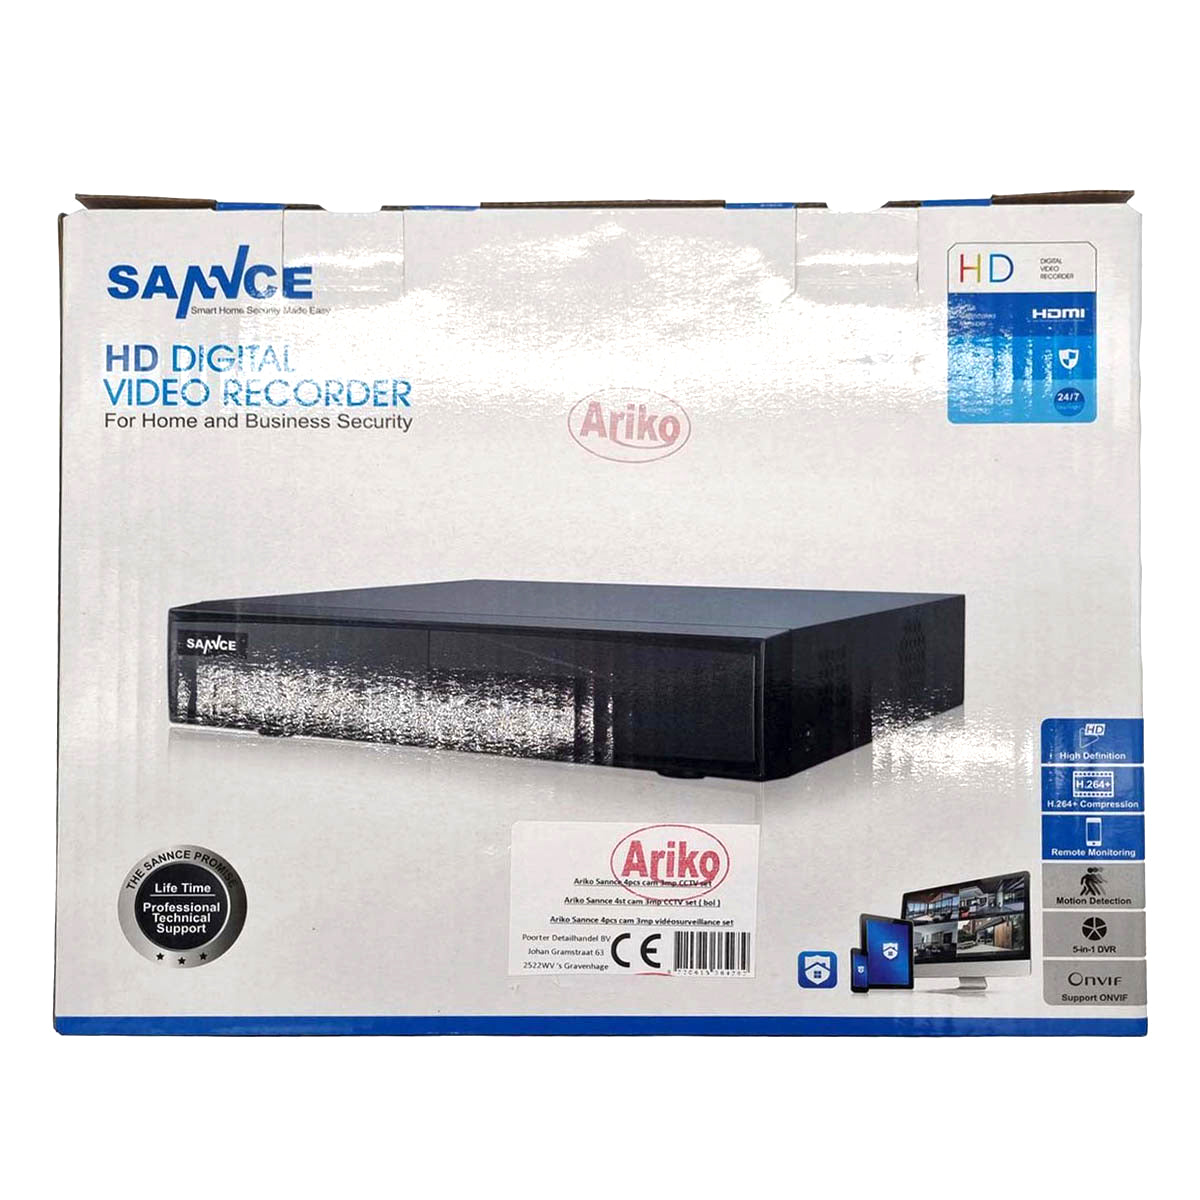 <tc>Ariko</tc> Sannce Camera CCTV system, 4 x Black high quality 3MP security cameras, Night vision 25 mtr, View recorded and live images online, including 1TB hard drive - Dutch helpdesk